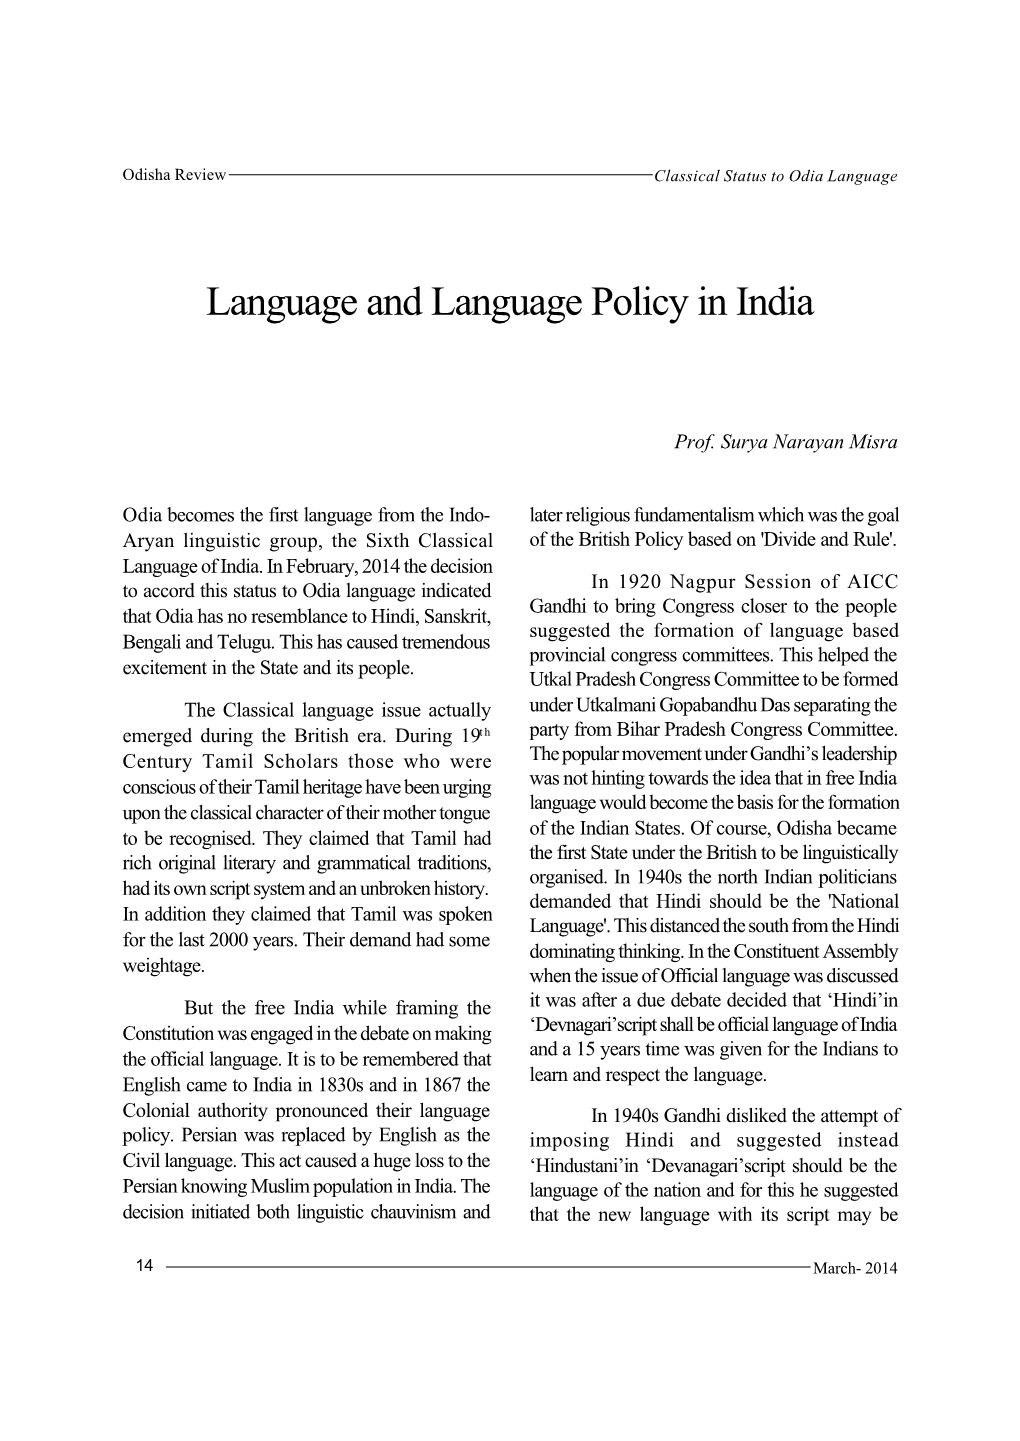 Language and Language Policy in India